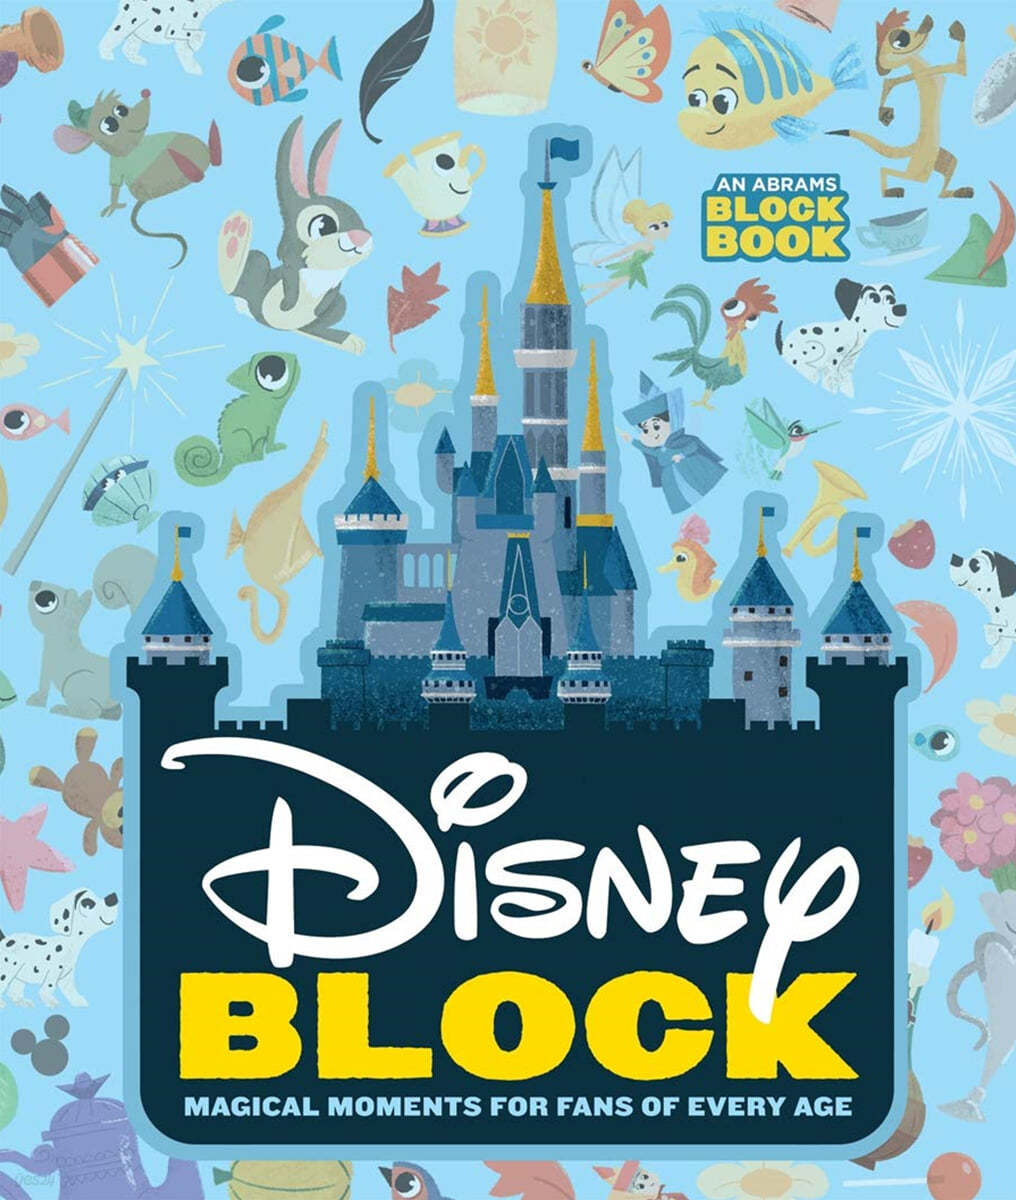 Disney Block (an Abrams Block Book): Magical Moments for Fans of Every Age